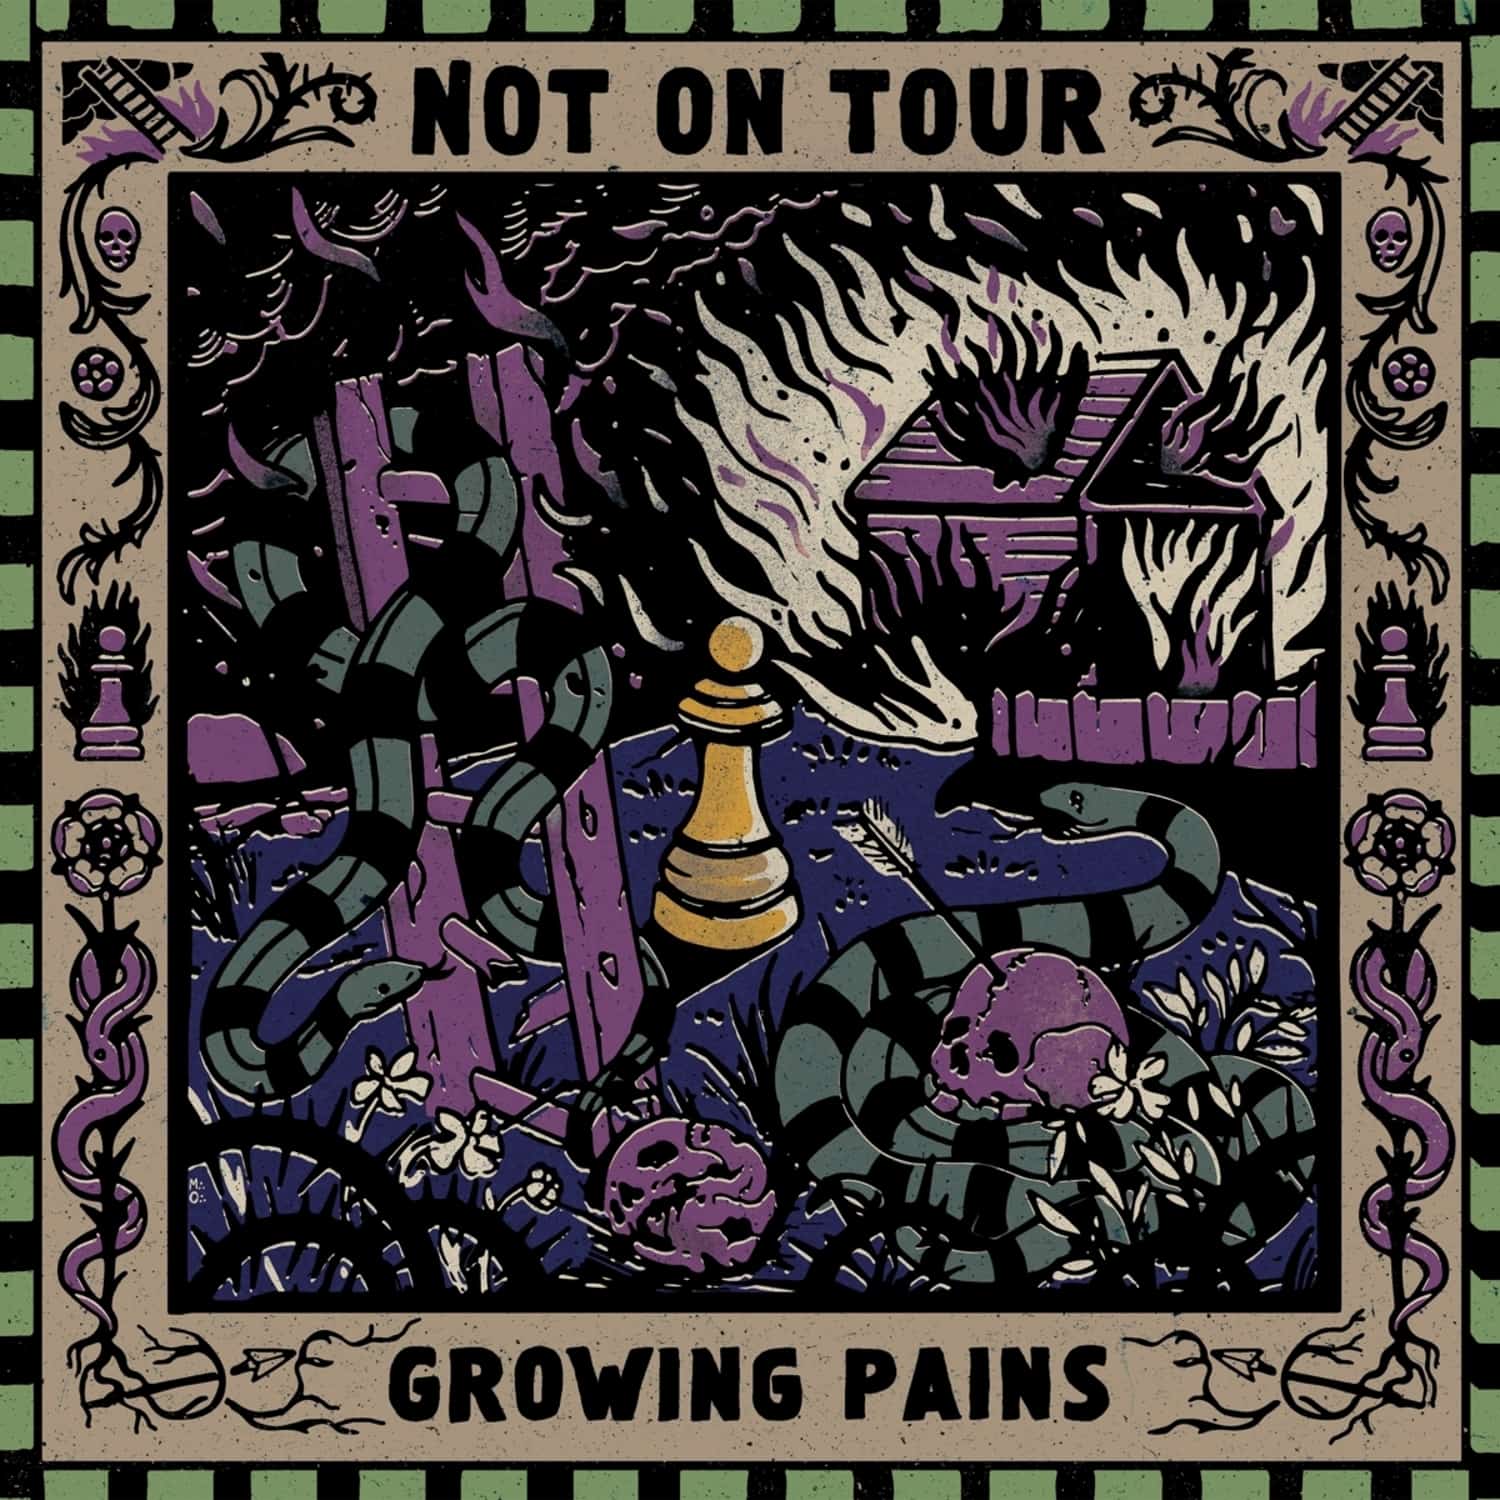 Not on Tour - GROWING PAINS 